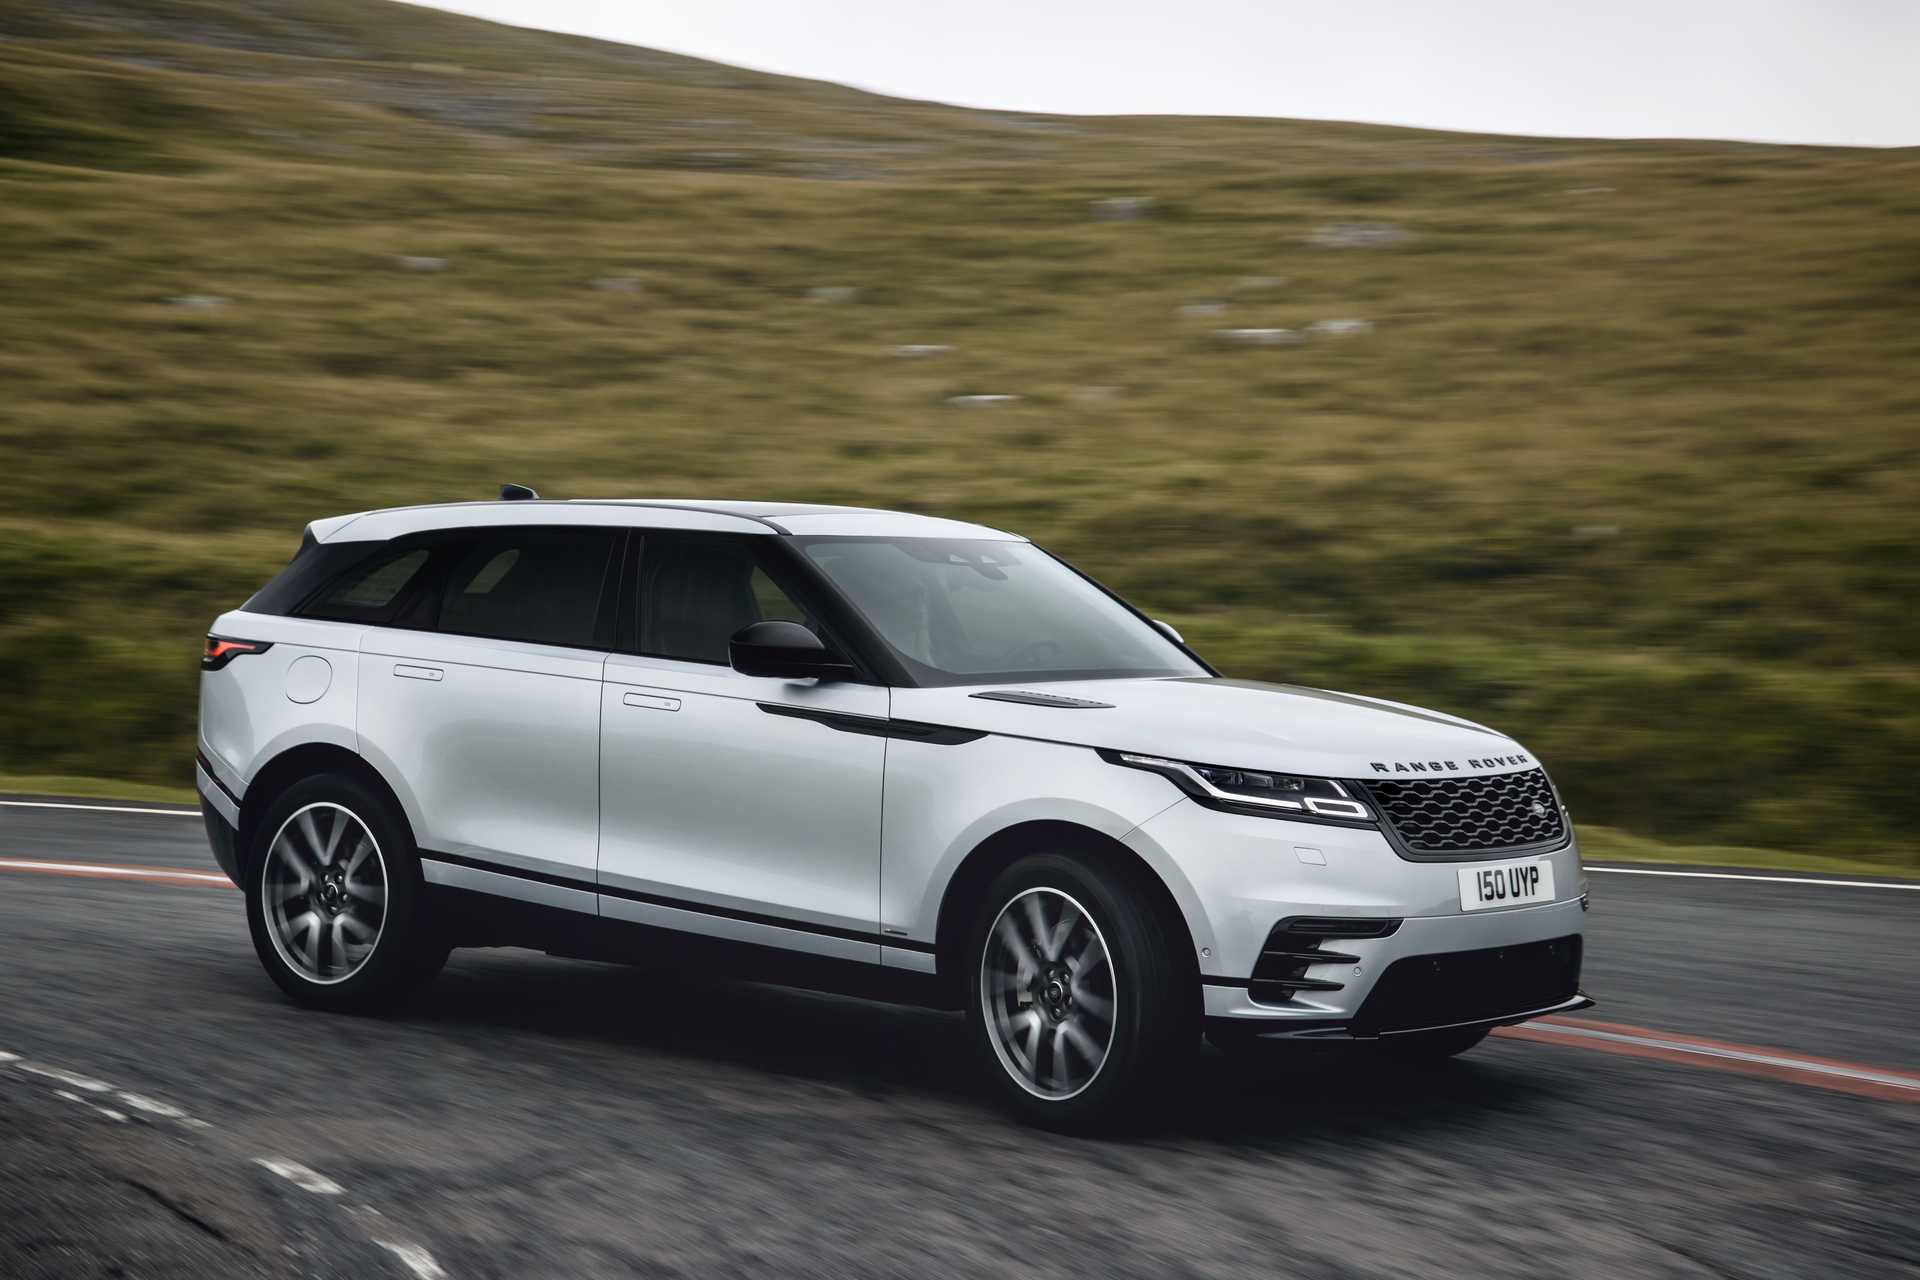 Fichiers Tuning Haute Qualité Land Rover Velar 5.0 V8 Supercharged SVAutobiography Dynamic Edition 550hp